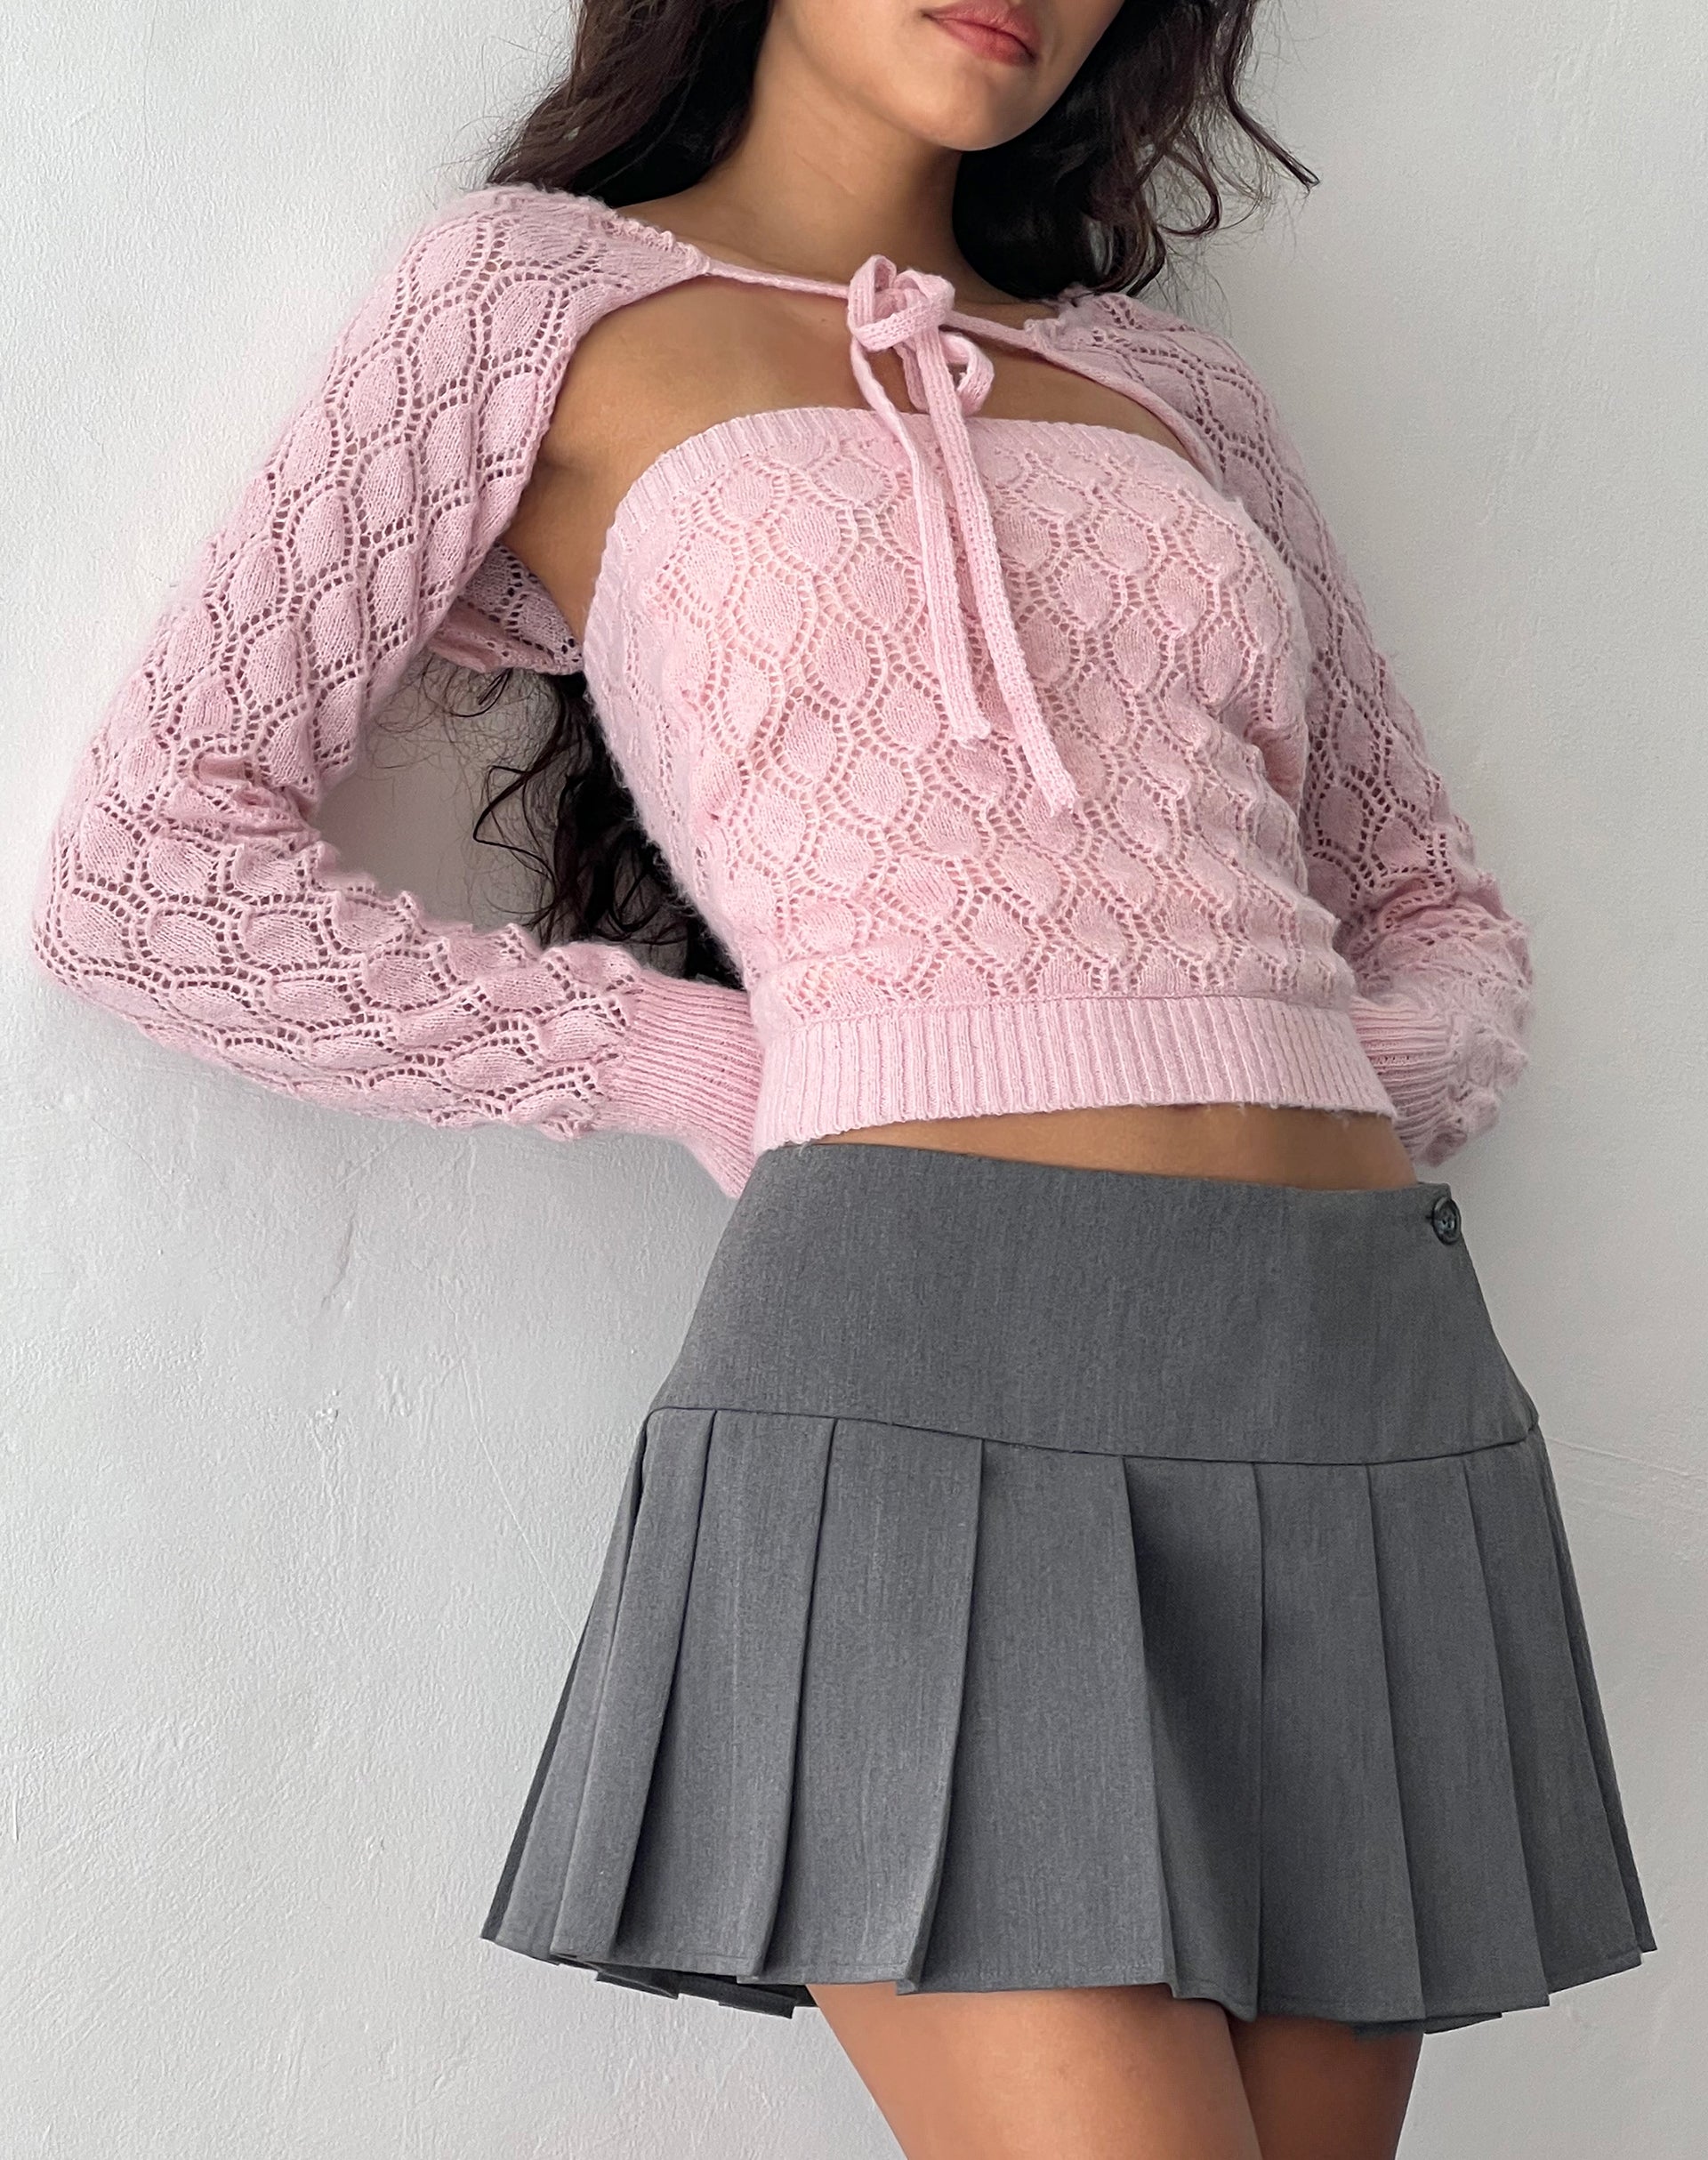 Image of Arinah Knitted Shrug Top in Ballet Pink